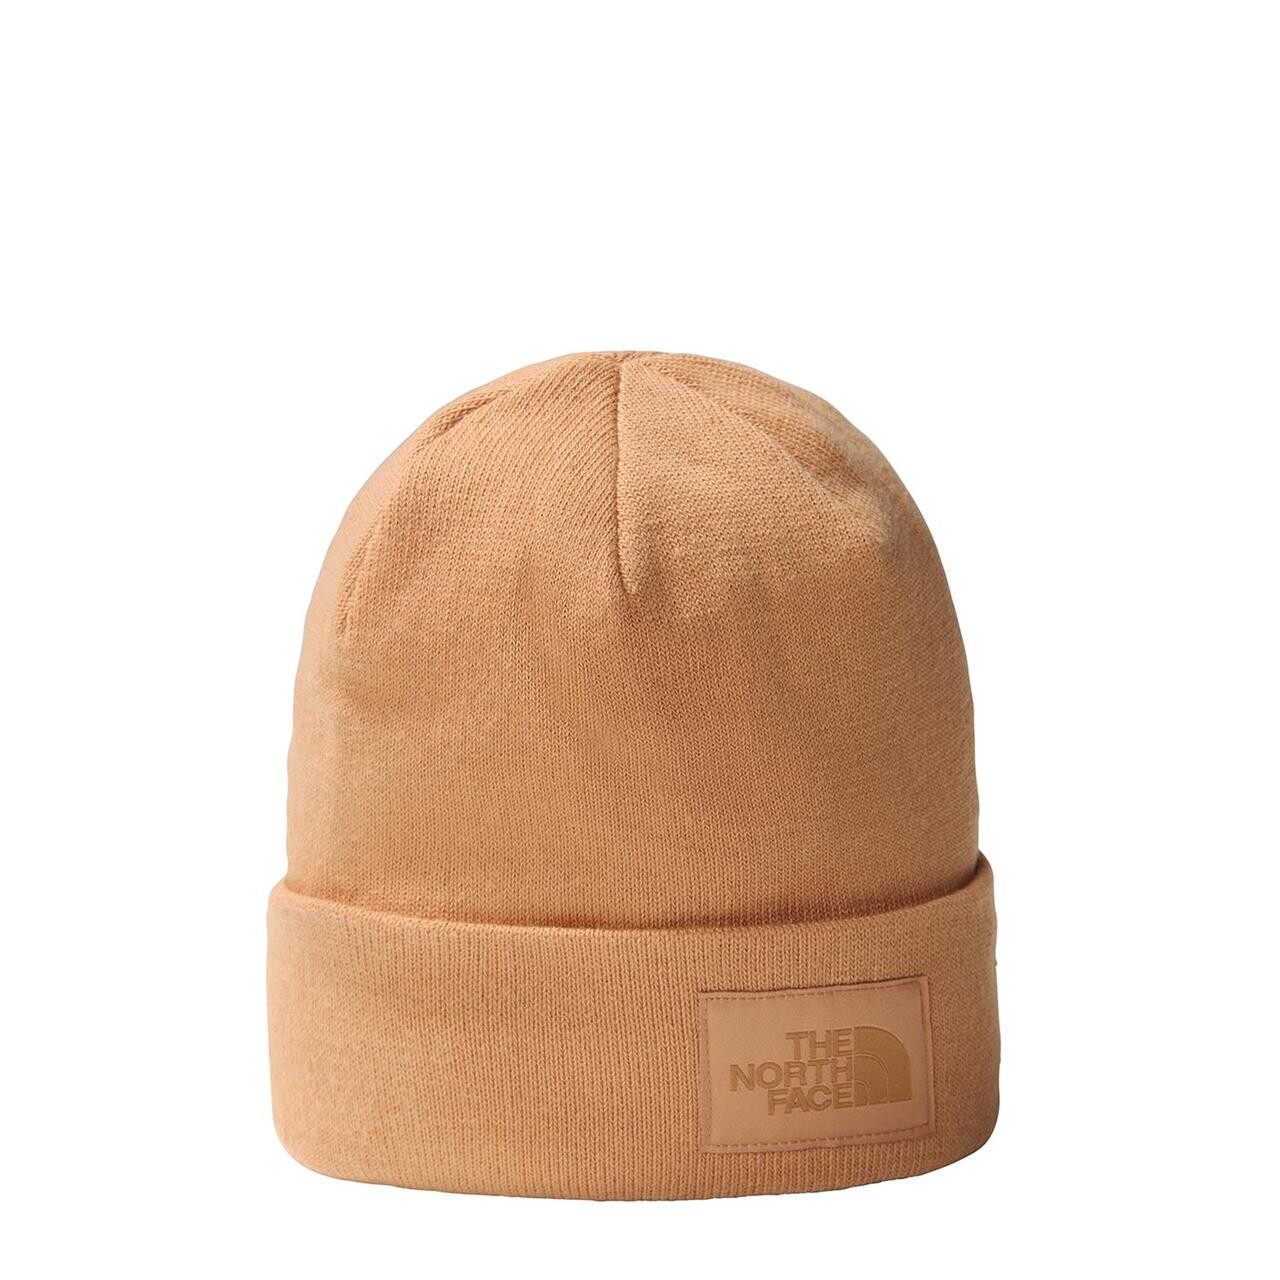 9: The North Face Dock Worker Recycled Beanie (Beige (ALMOND BUTTER) One size)